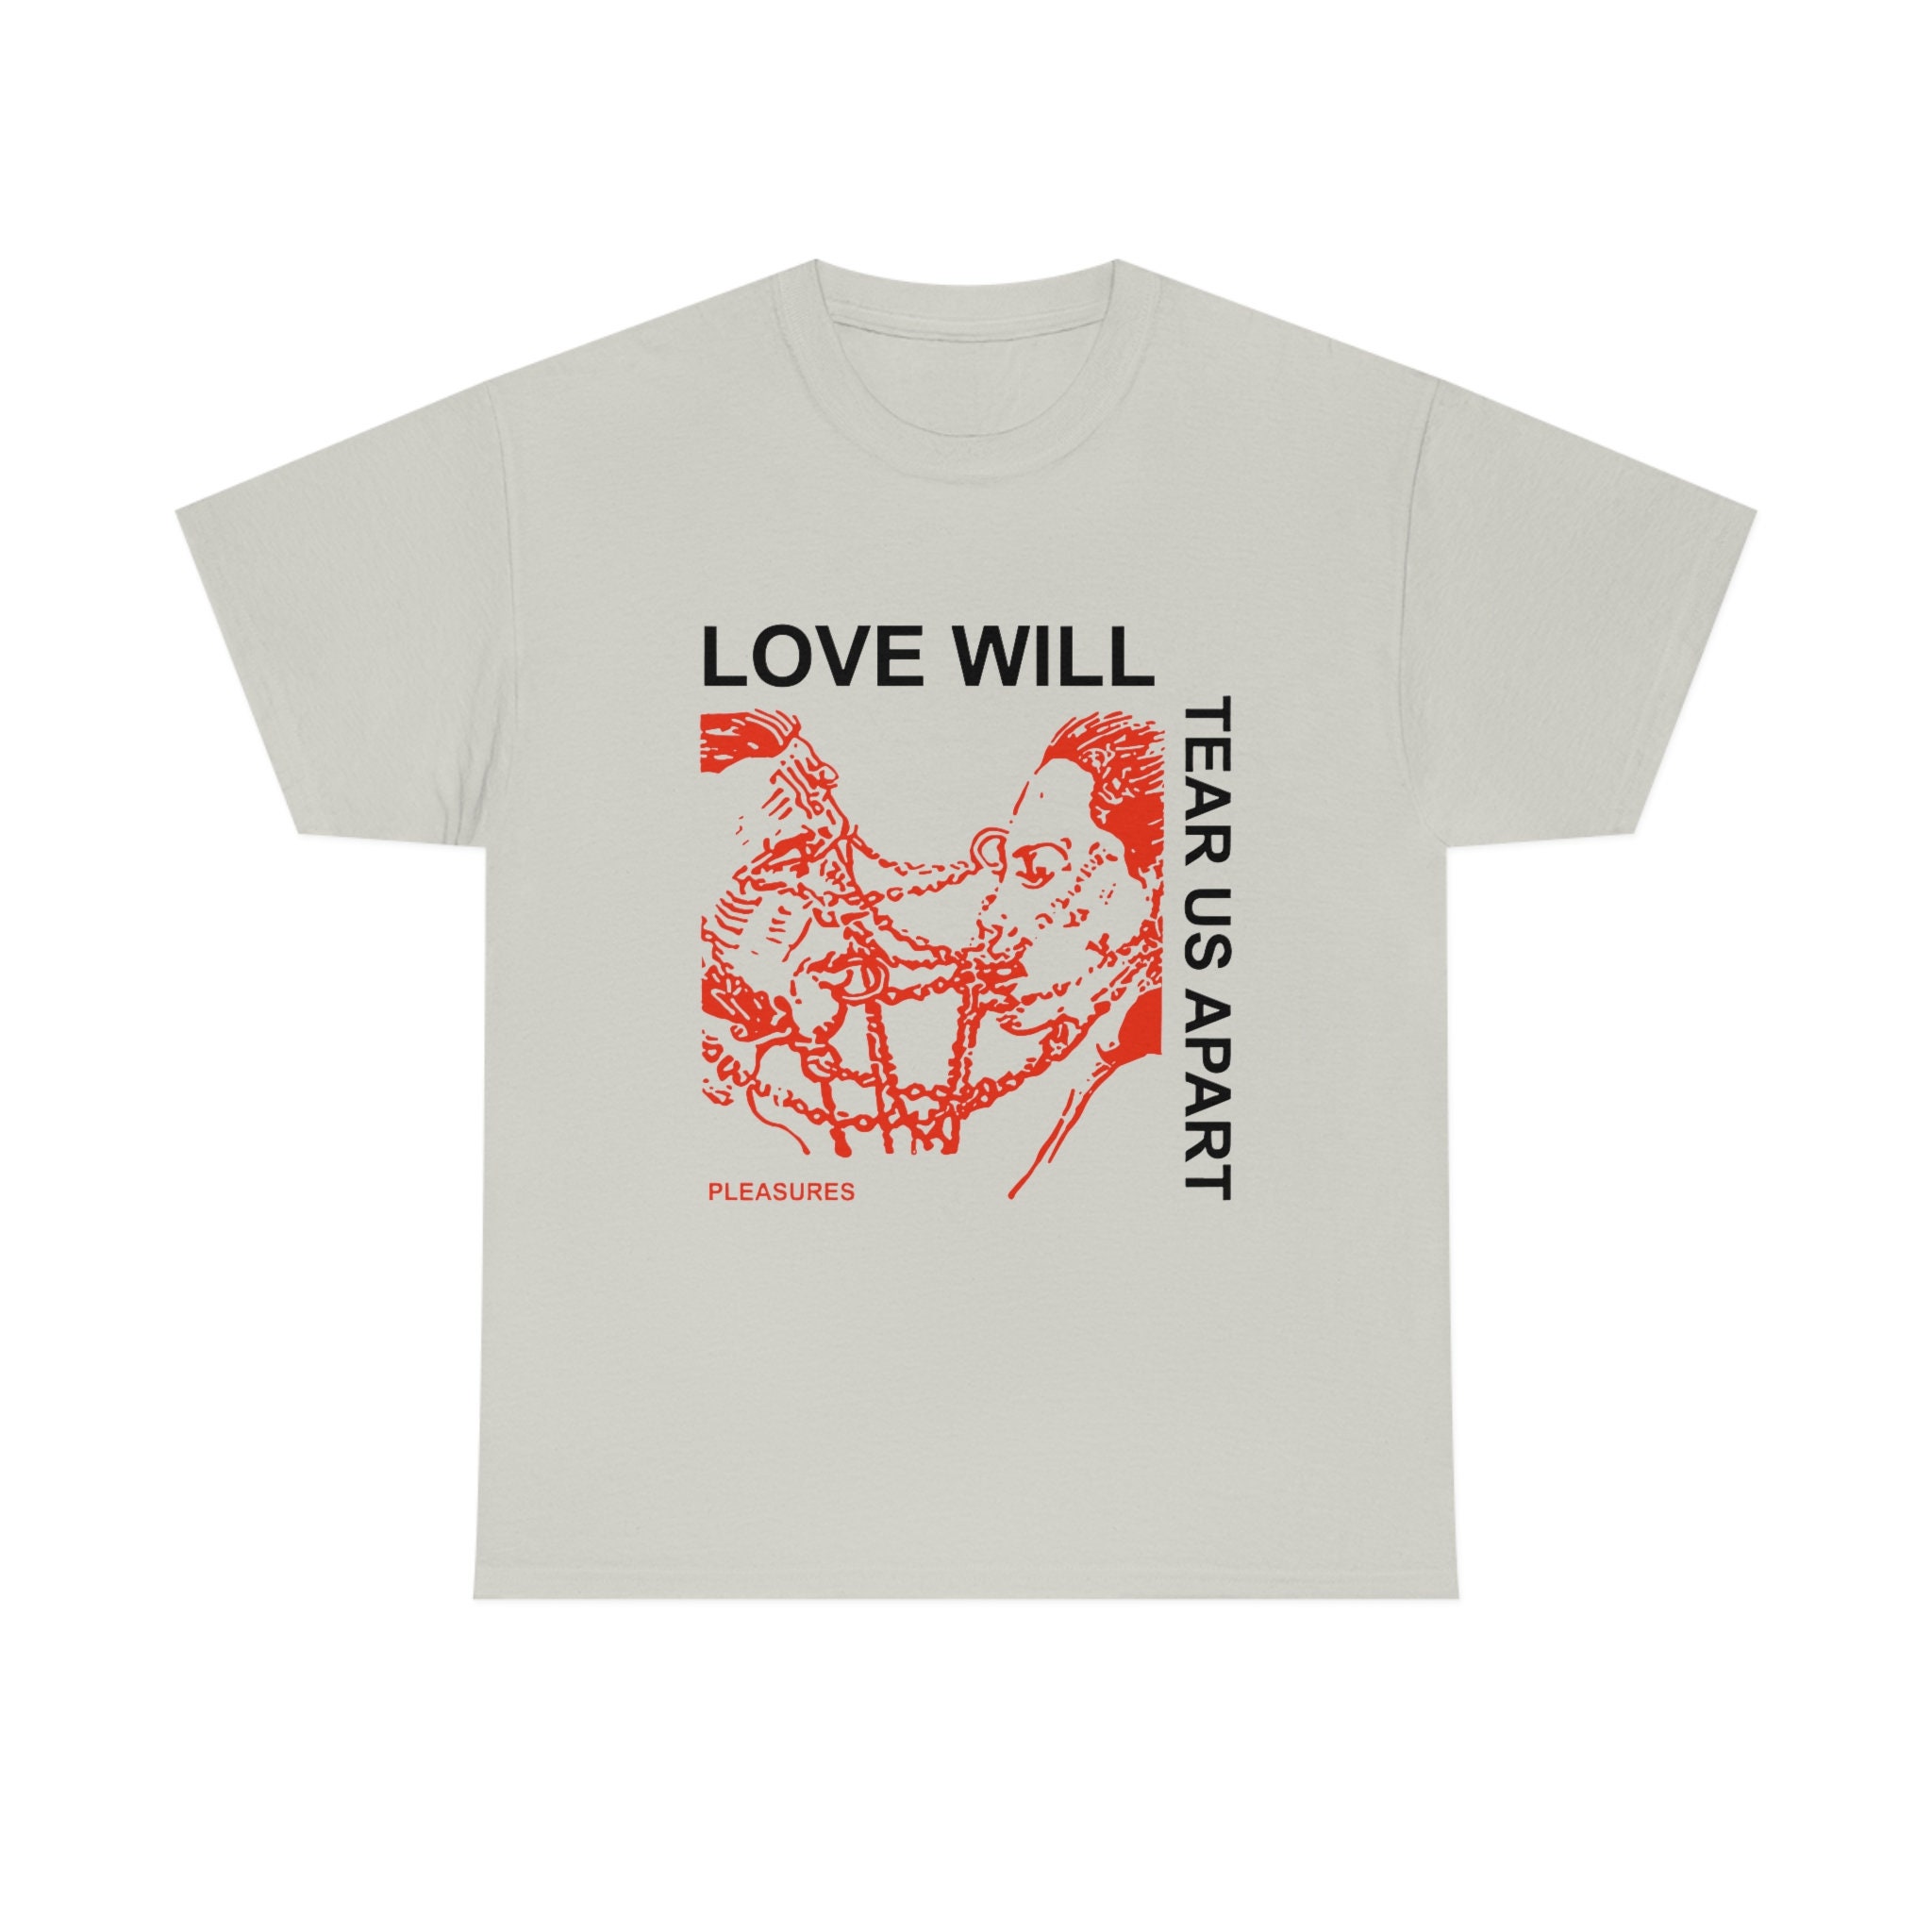 Discover Lil Peep Love Will Tear Us Apart Shirt -aesthetic shirt,aesthetic clothing,lil peep shirt